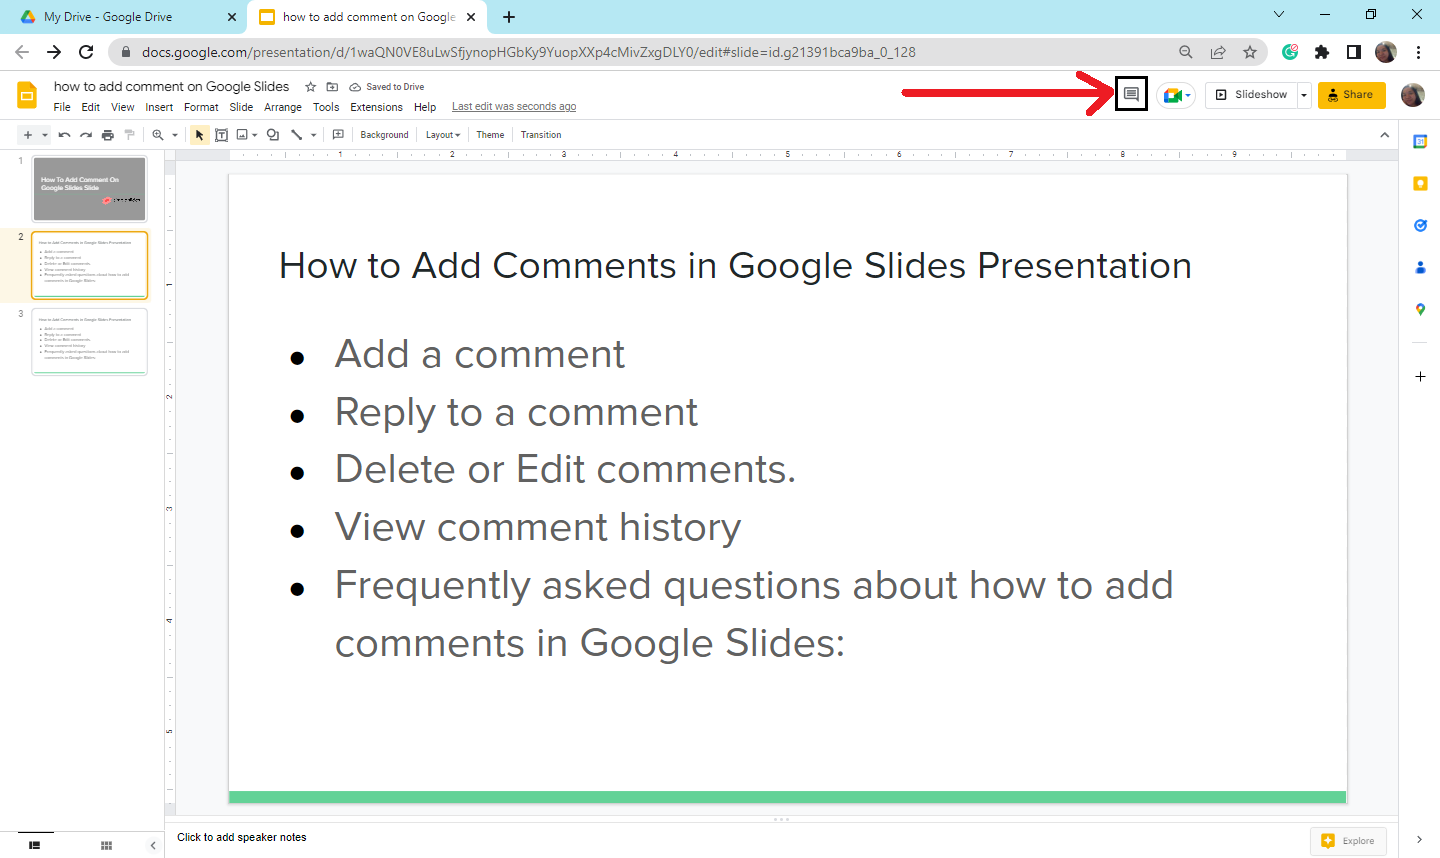 Click "Open Comment History" on the top corner of your Google Slides to see the old comments you had.